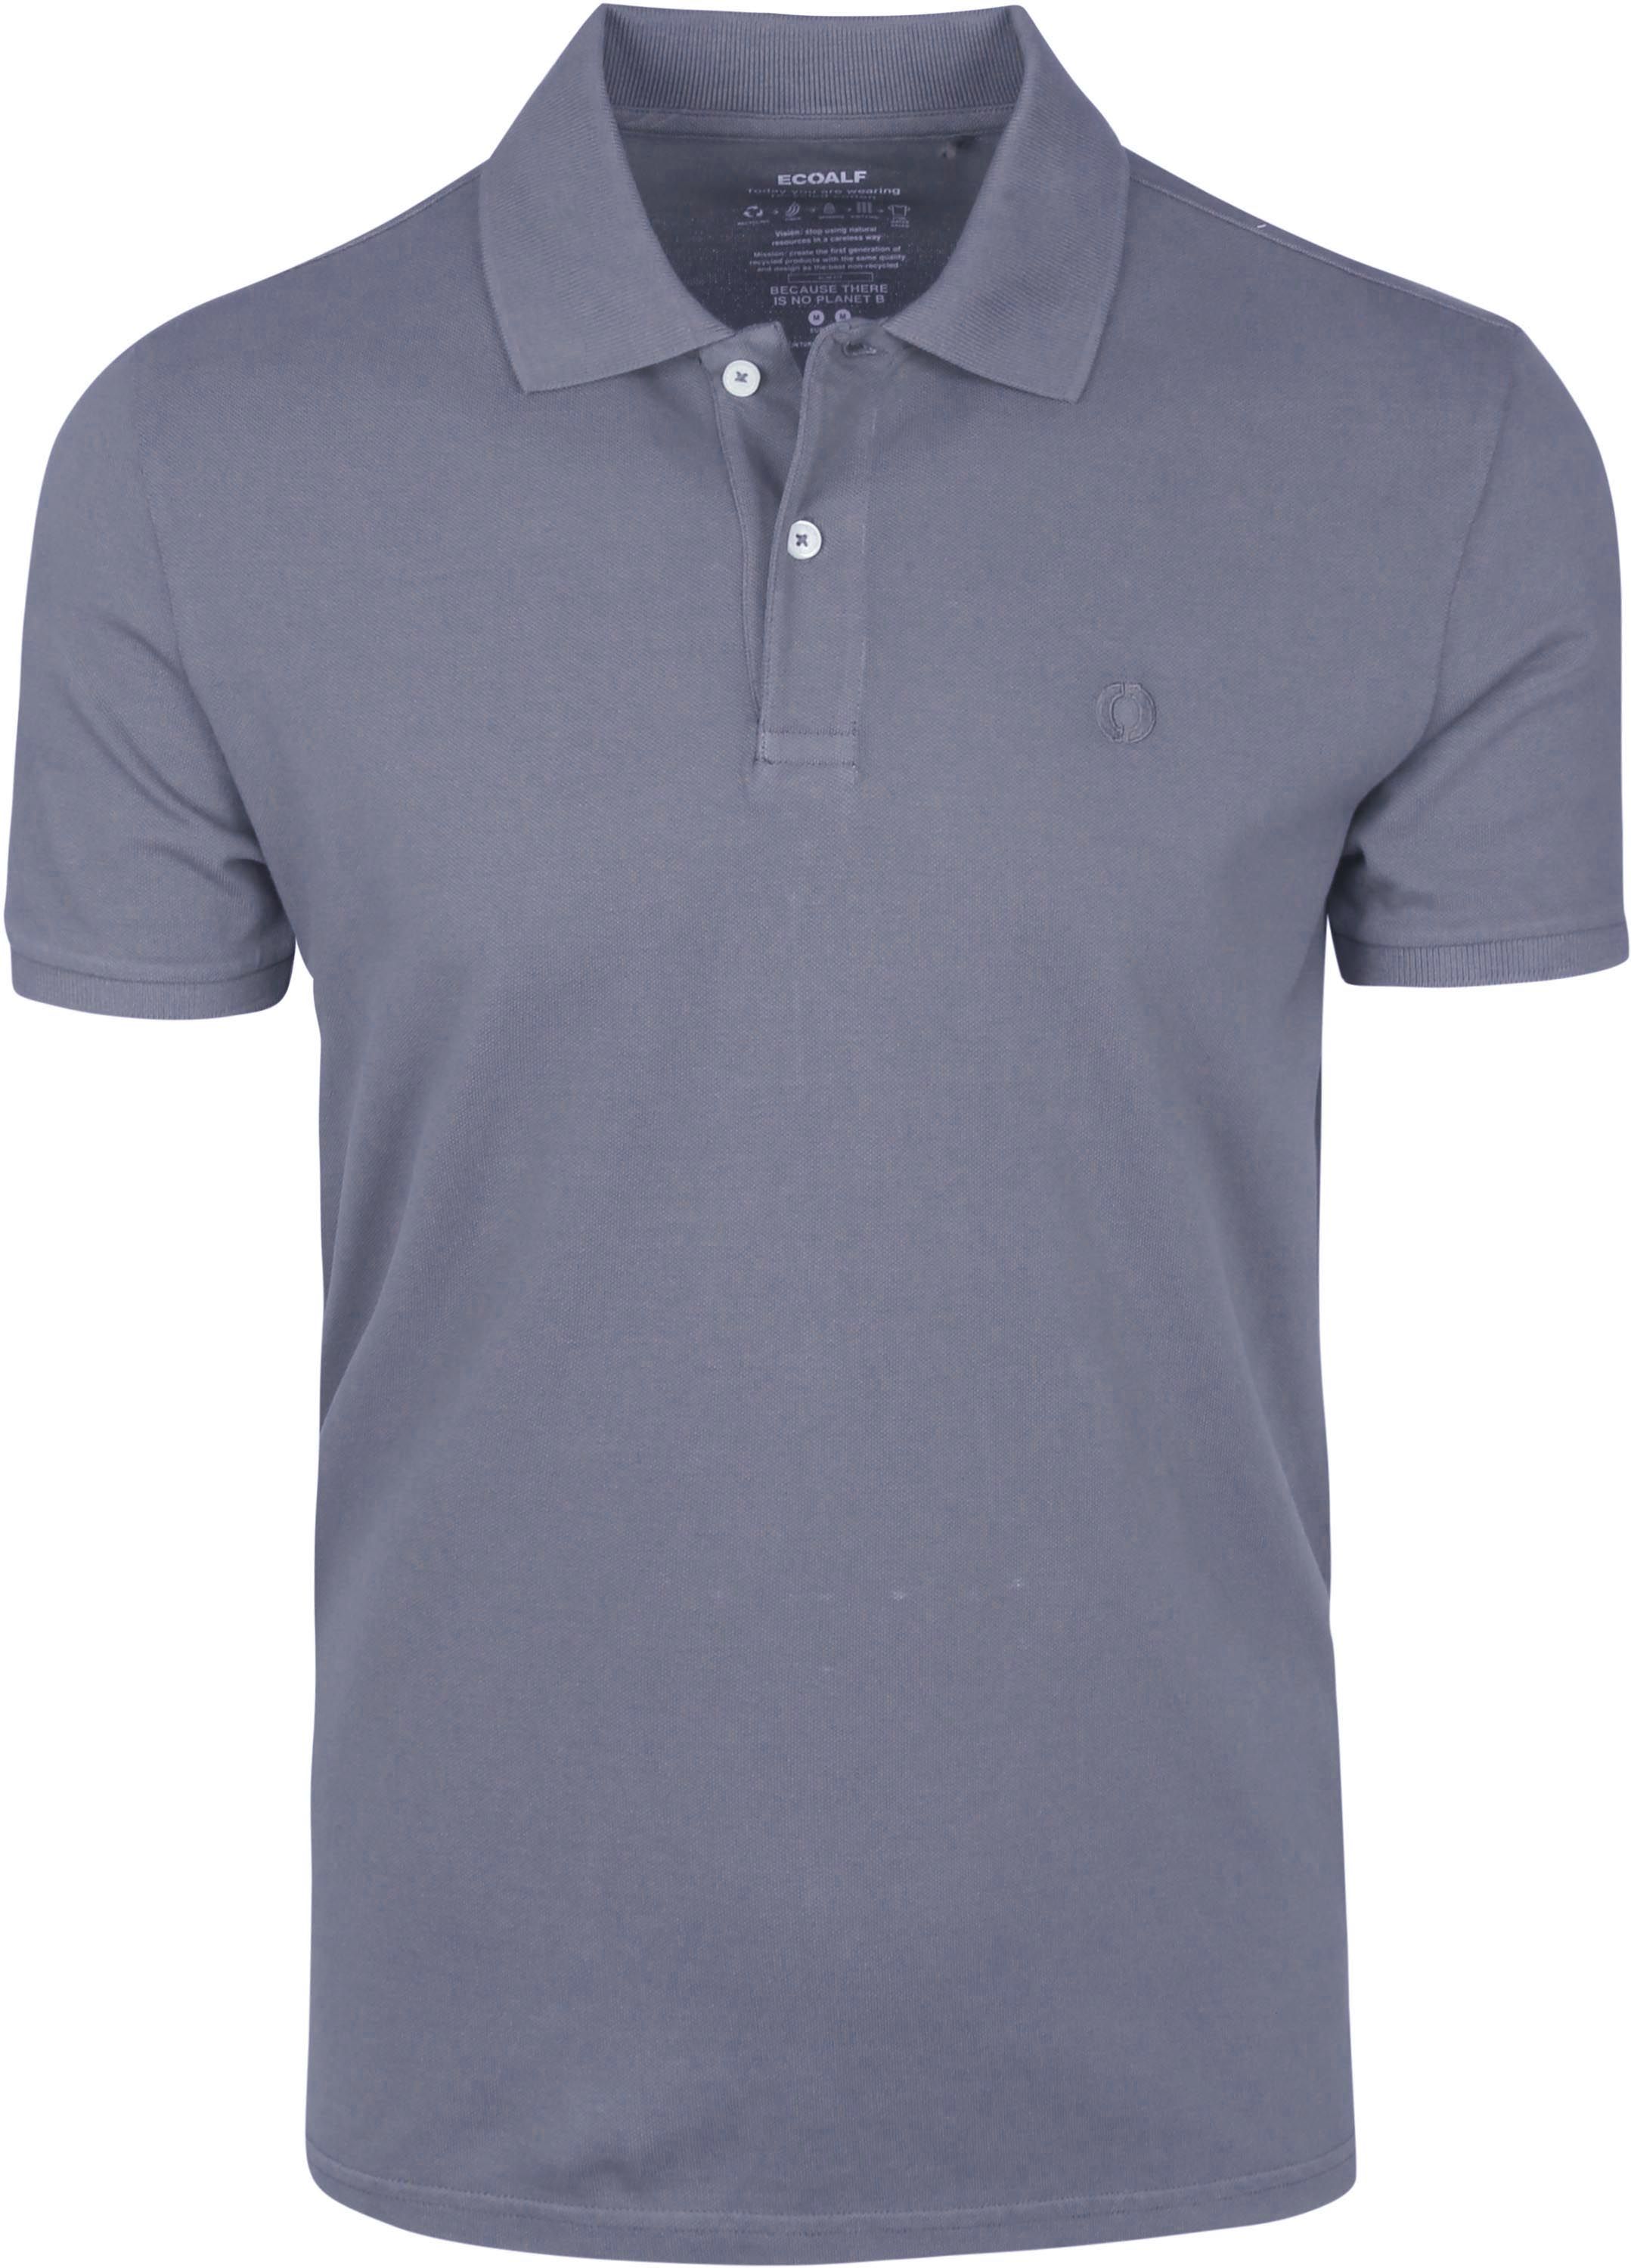 Ecoalf Polo Ted Washed Blue Dark Grey size L